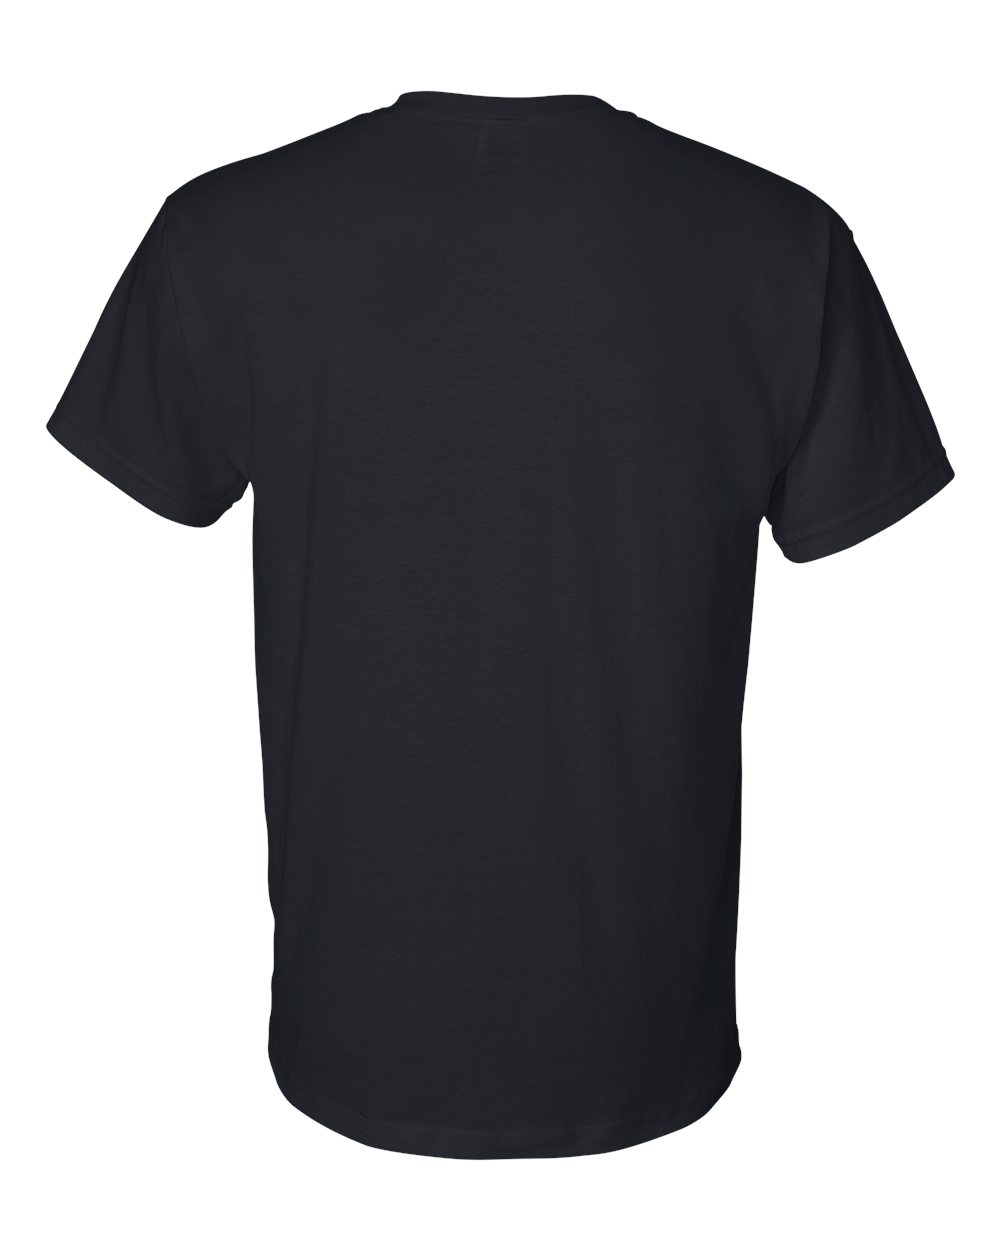 custom apparel gildan dry blend jersey tee shirt in multiple sizes and colors